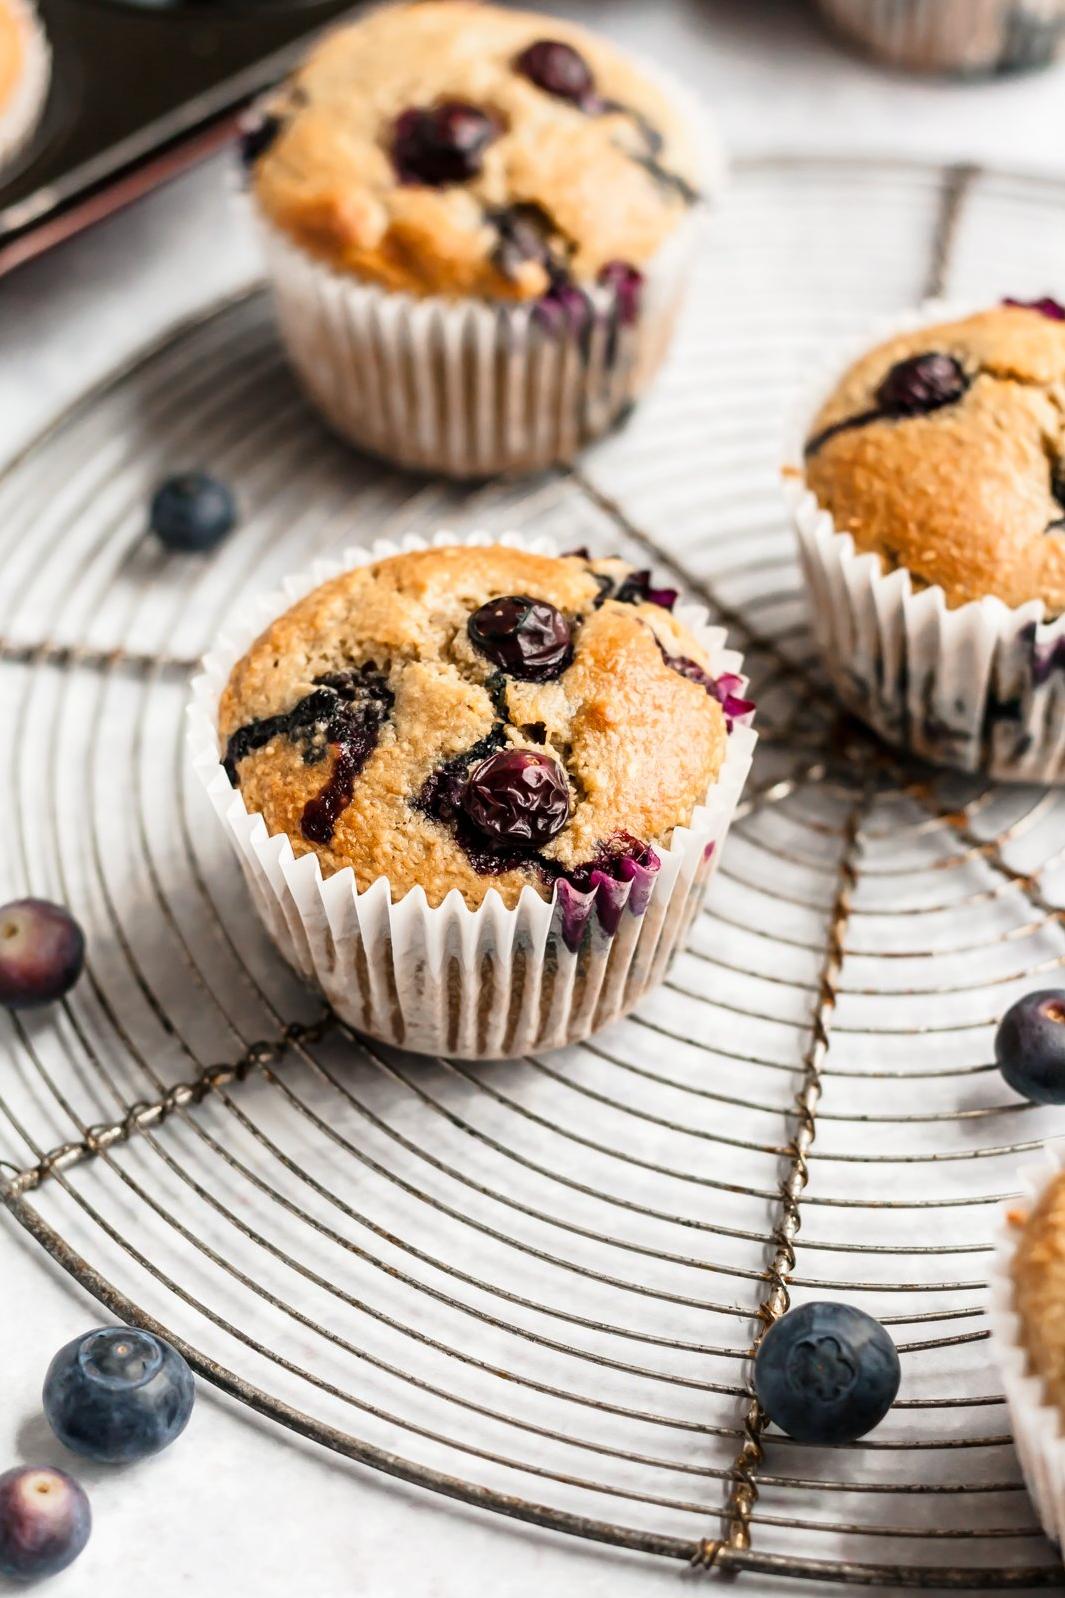  These muffins are gluten-free, hearty and delicious!